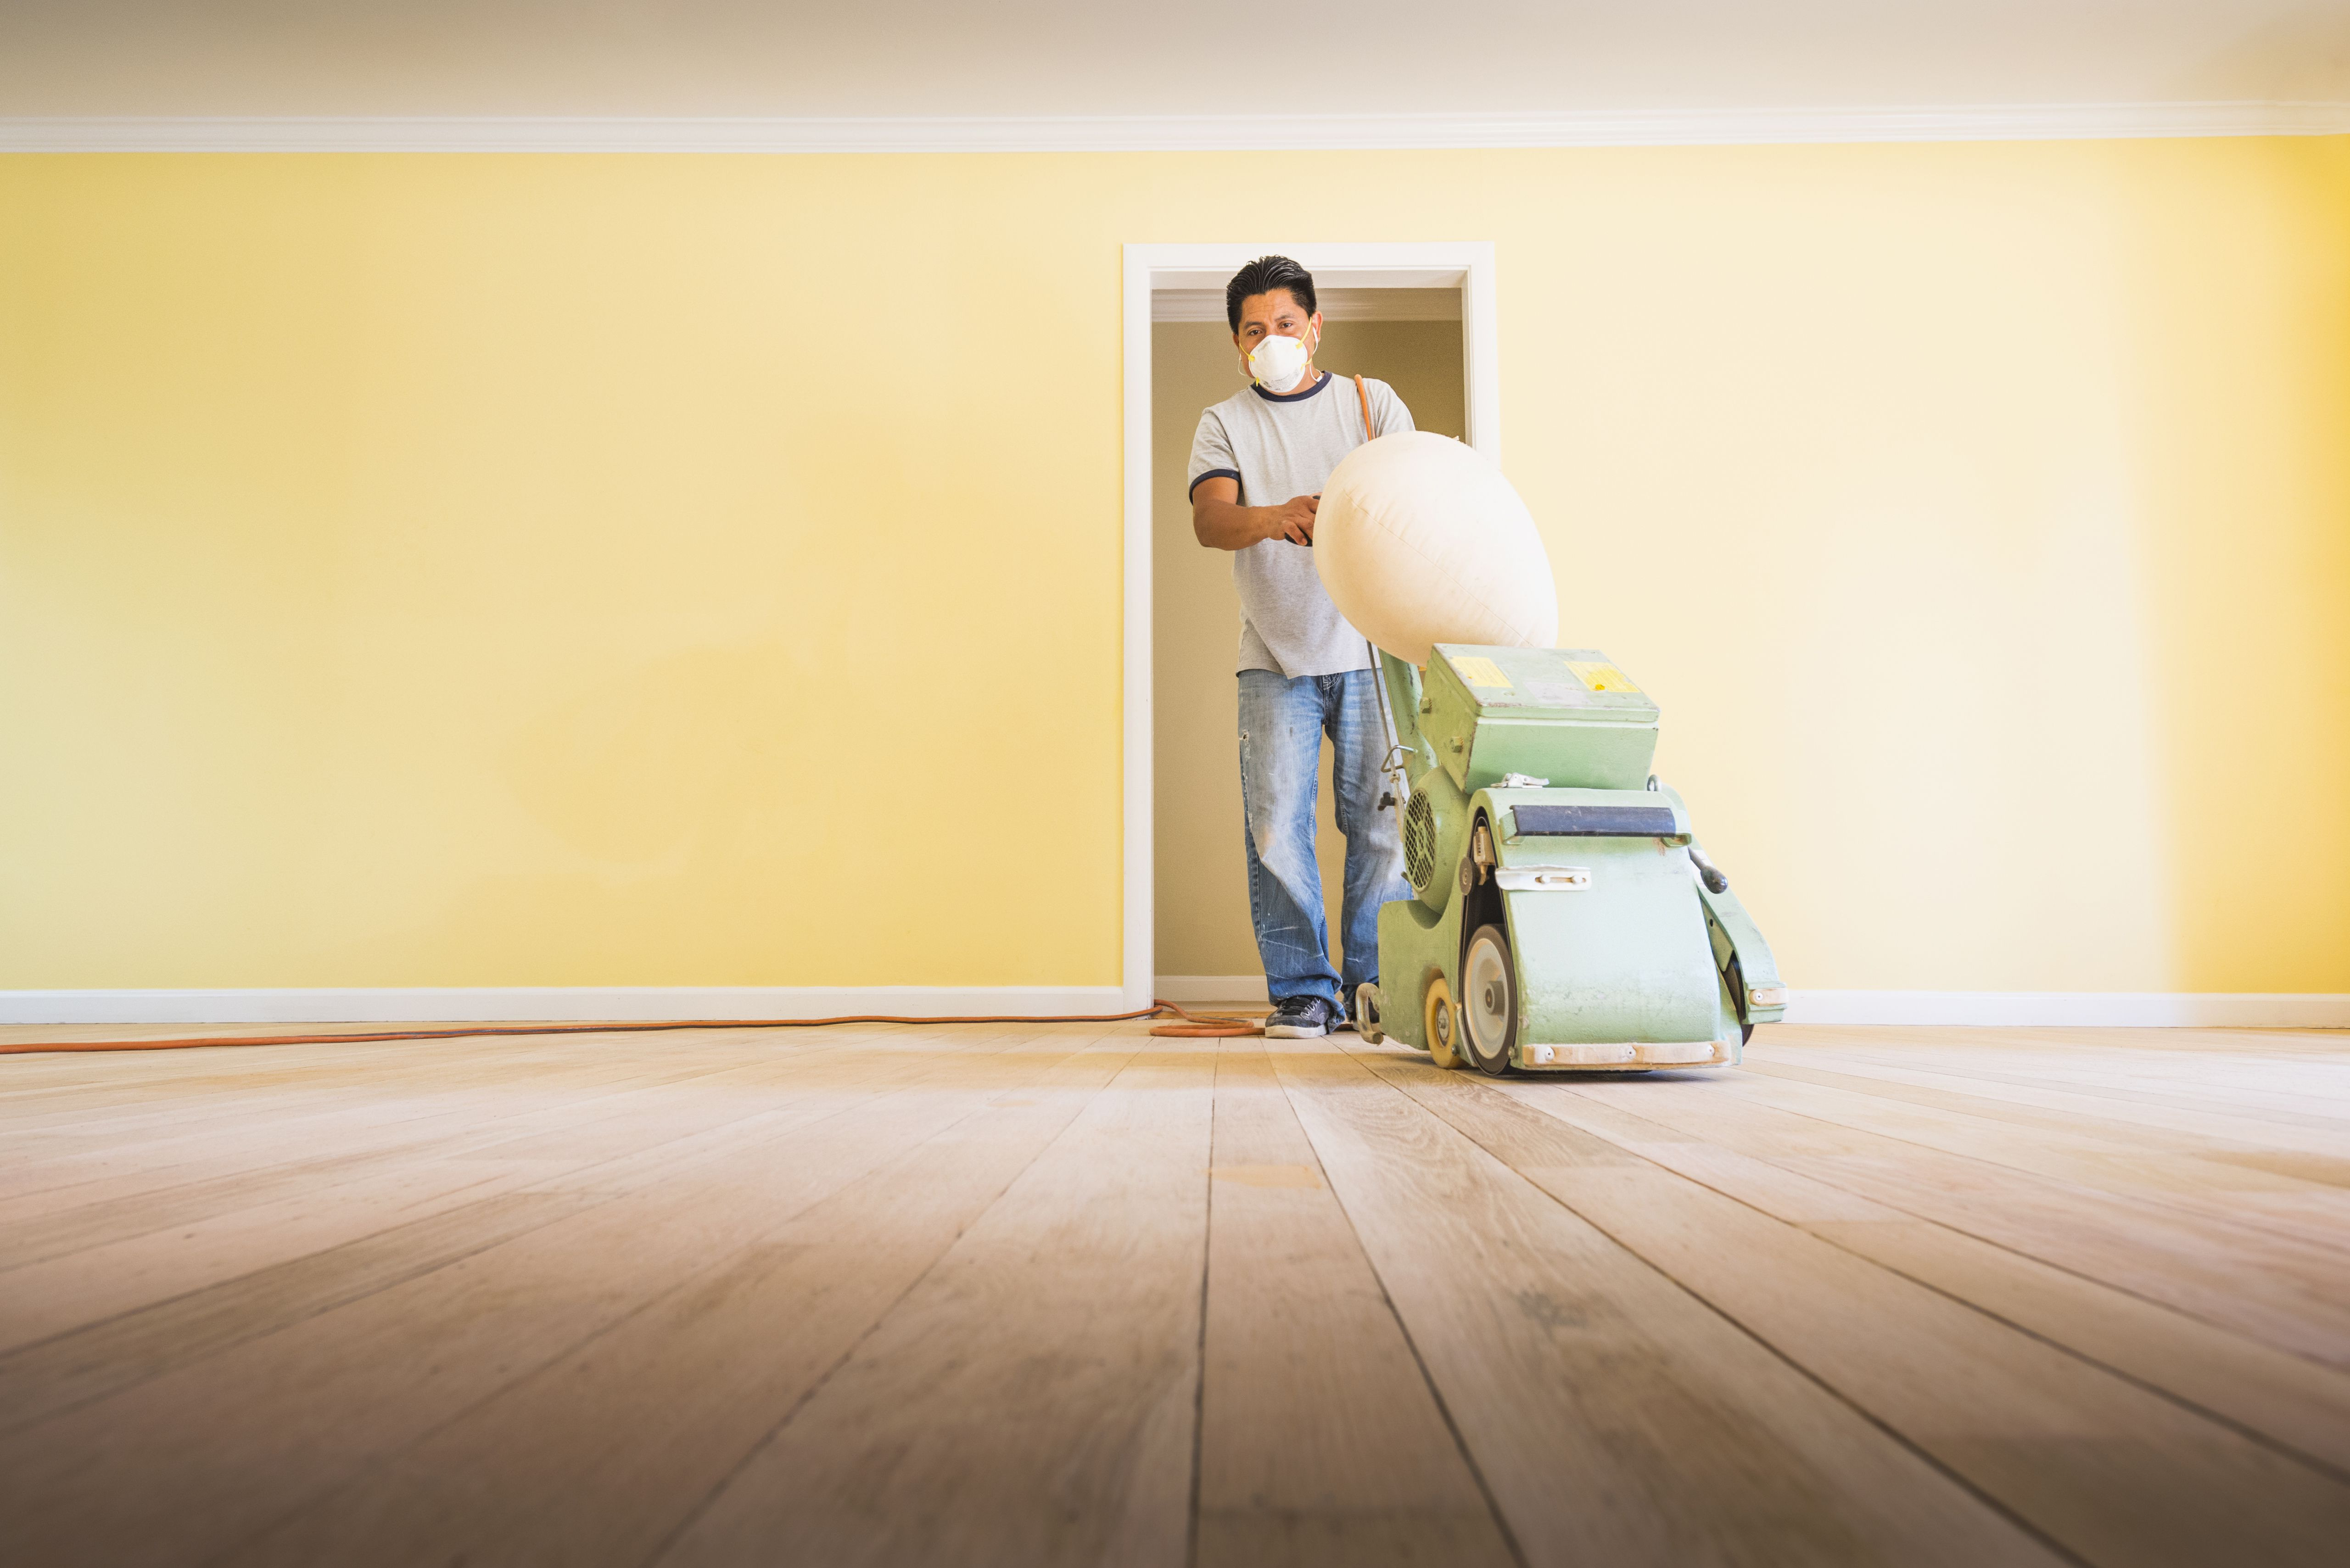 how to refinish hardwood floors by hand of should you paint walls or refinish floors first with floorsandingafterpainting 5a8f08dfae9ab80037d9d878